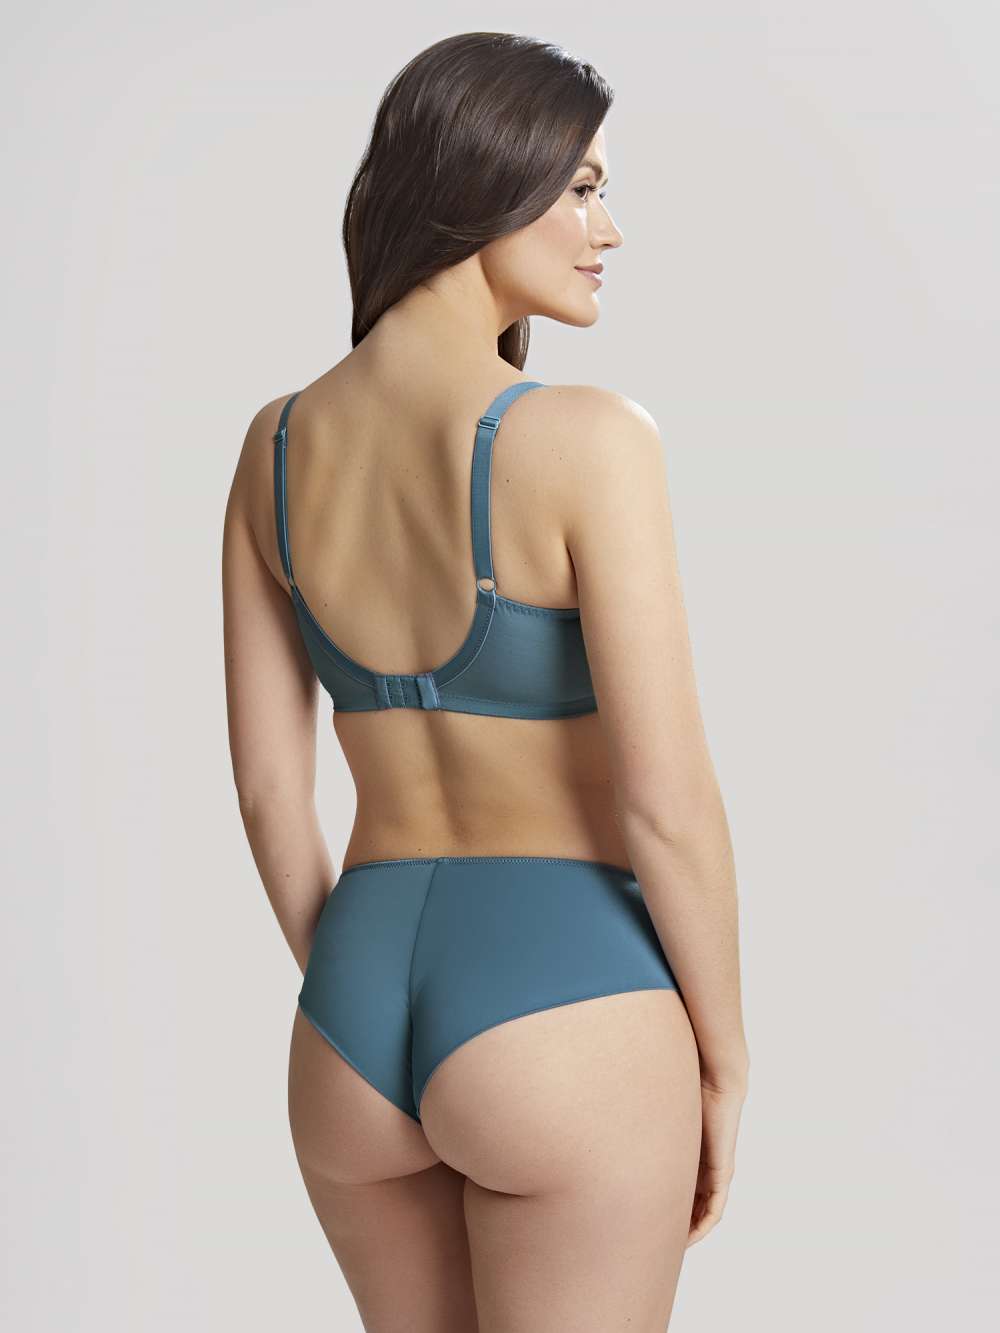 Tango Brief - Aegean worn by model back view